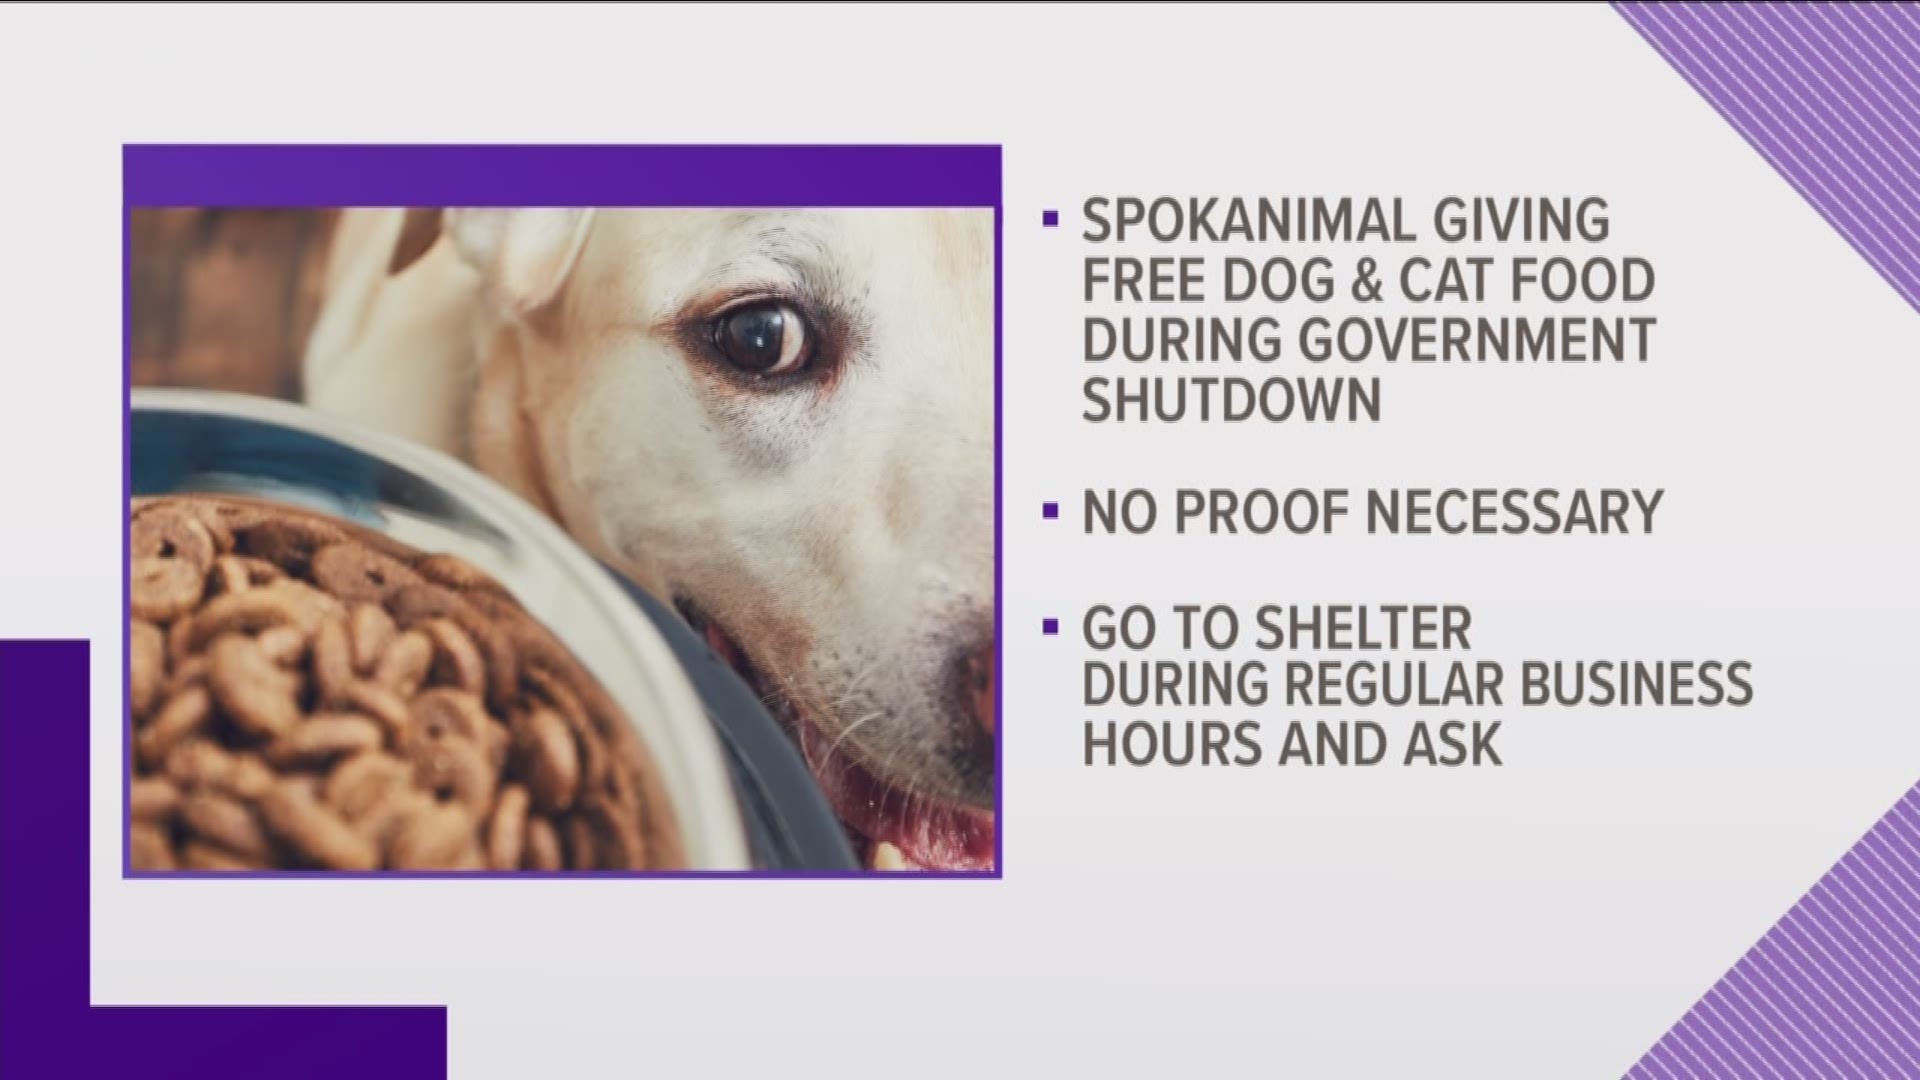 Peck said there is no proof necessary. Those impacted can come in during regular business hours and ask for pet food.